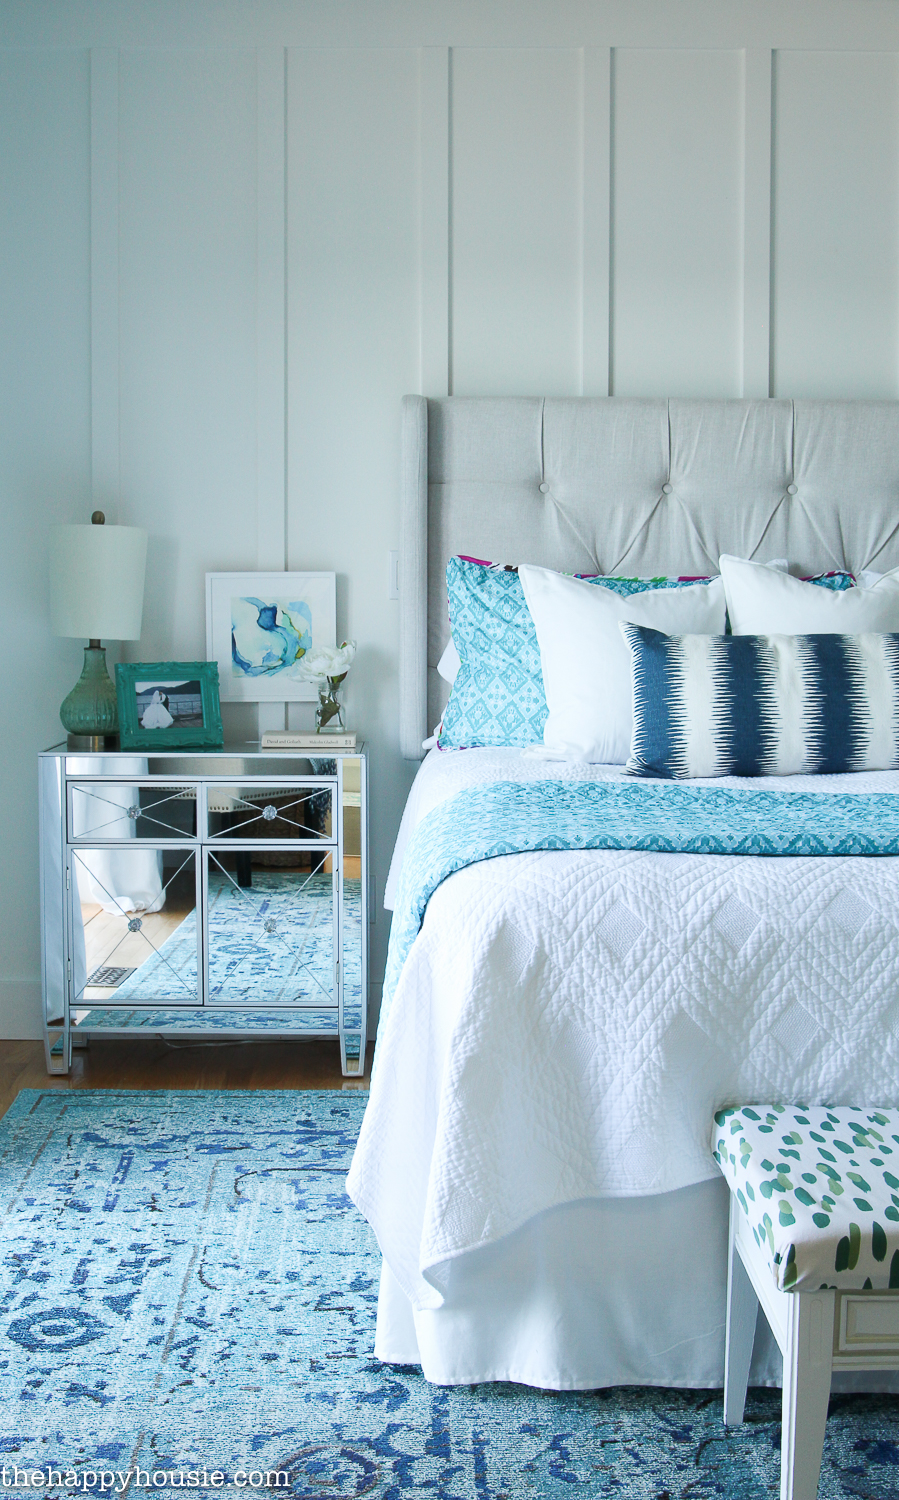 How to Decorate Your Master Bedroom on a Budget | The Happy Housie